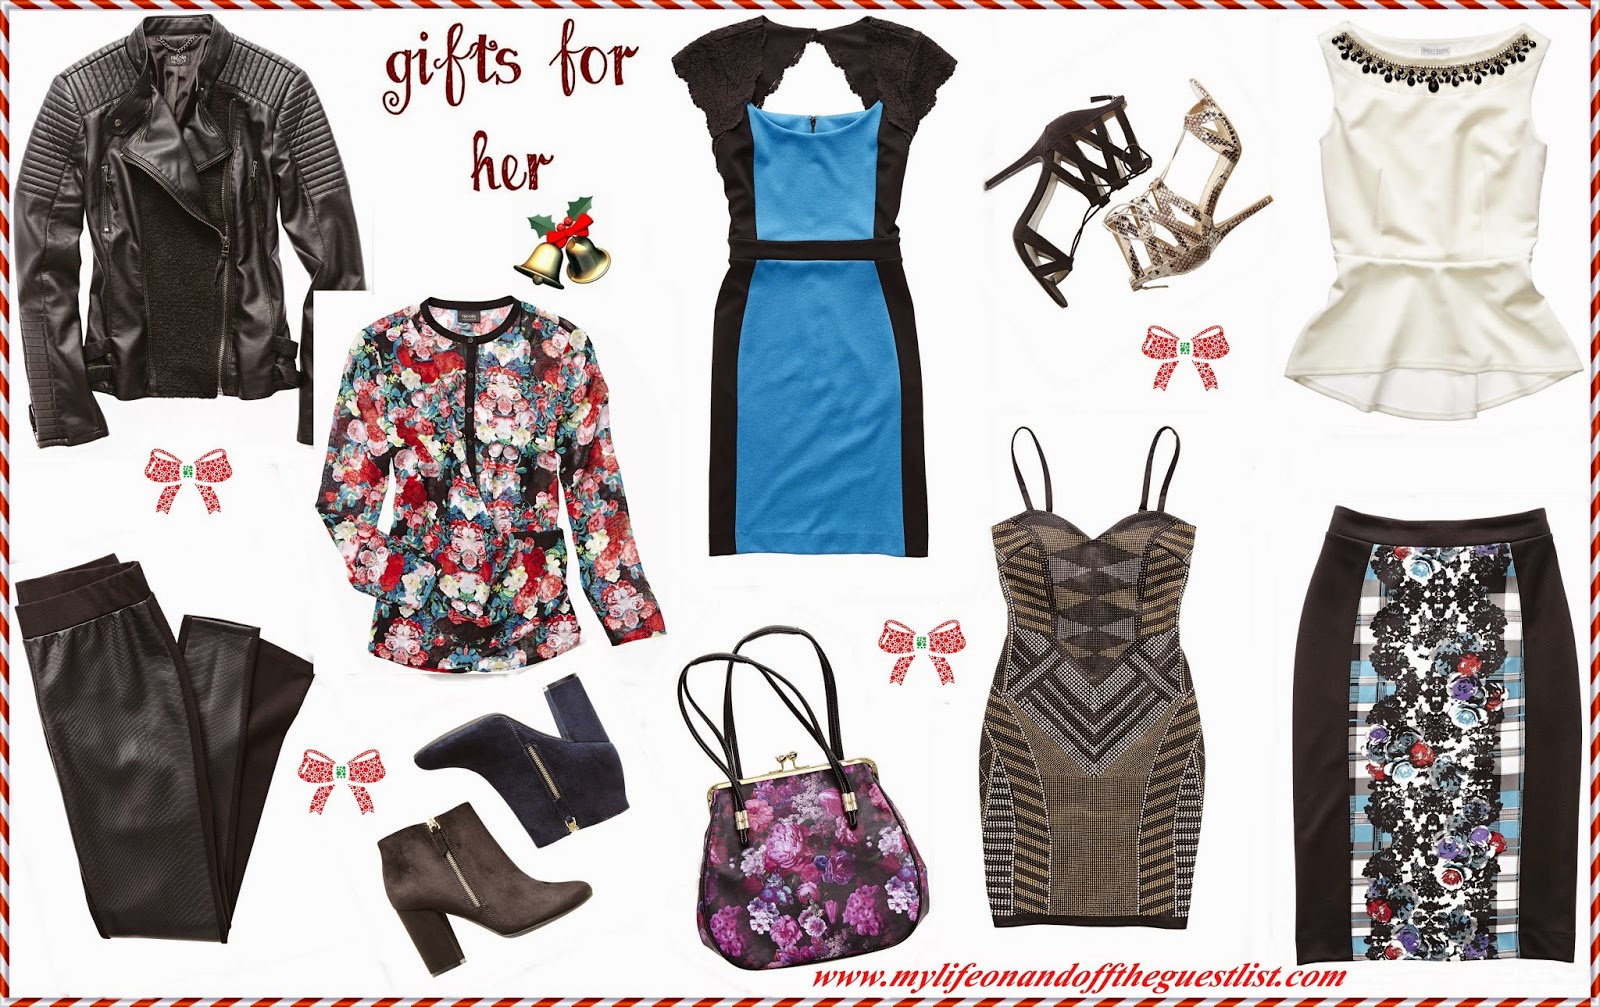 JCPenney Holiday Gifts for her www.mylifeonandofftheguestlist.com